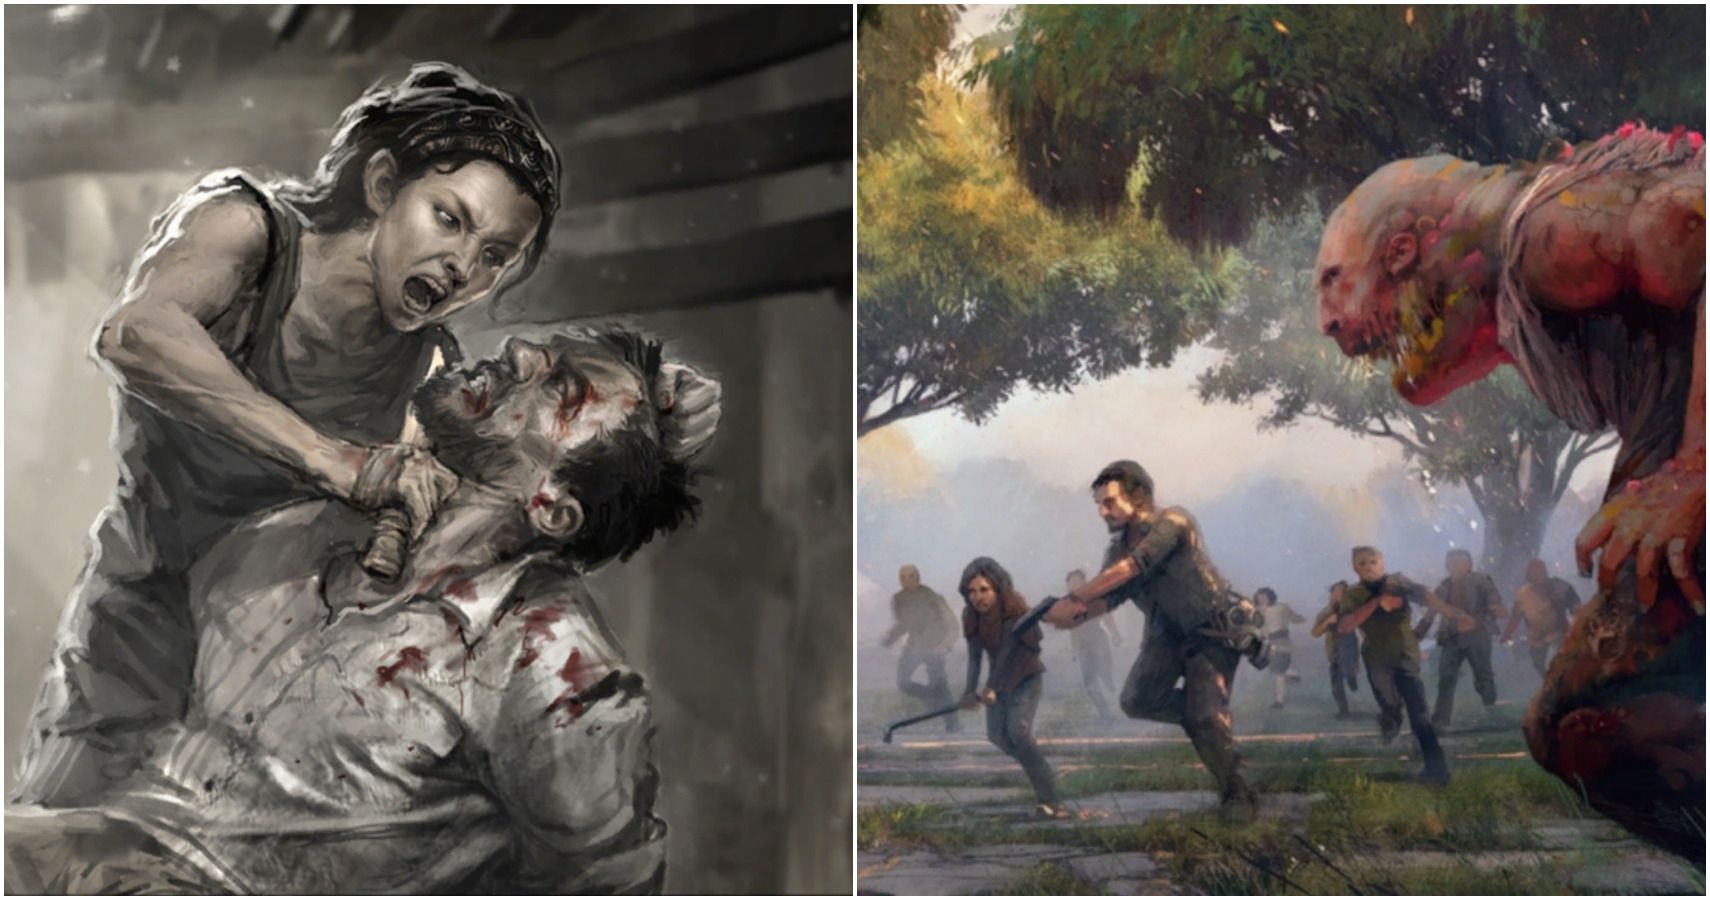 The Art of the Last of Us